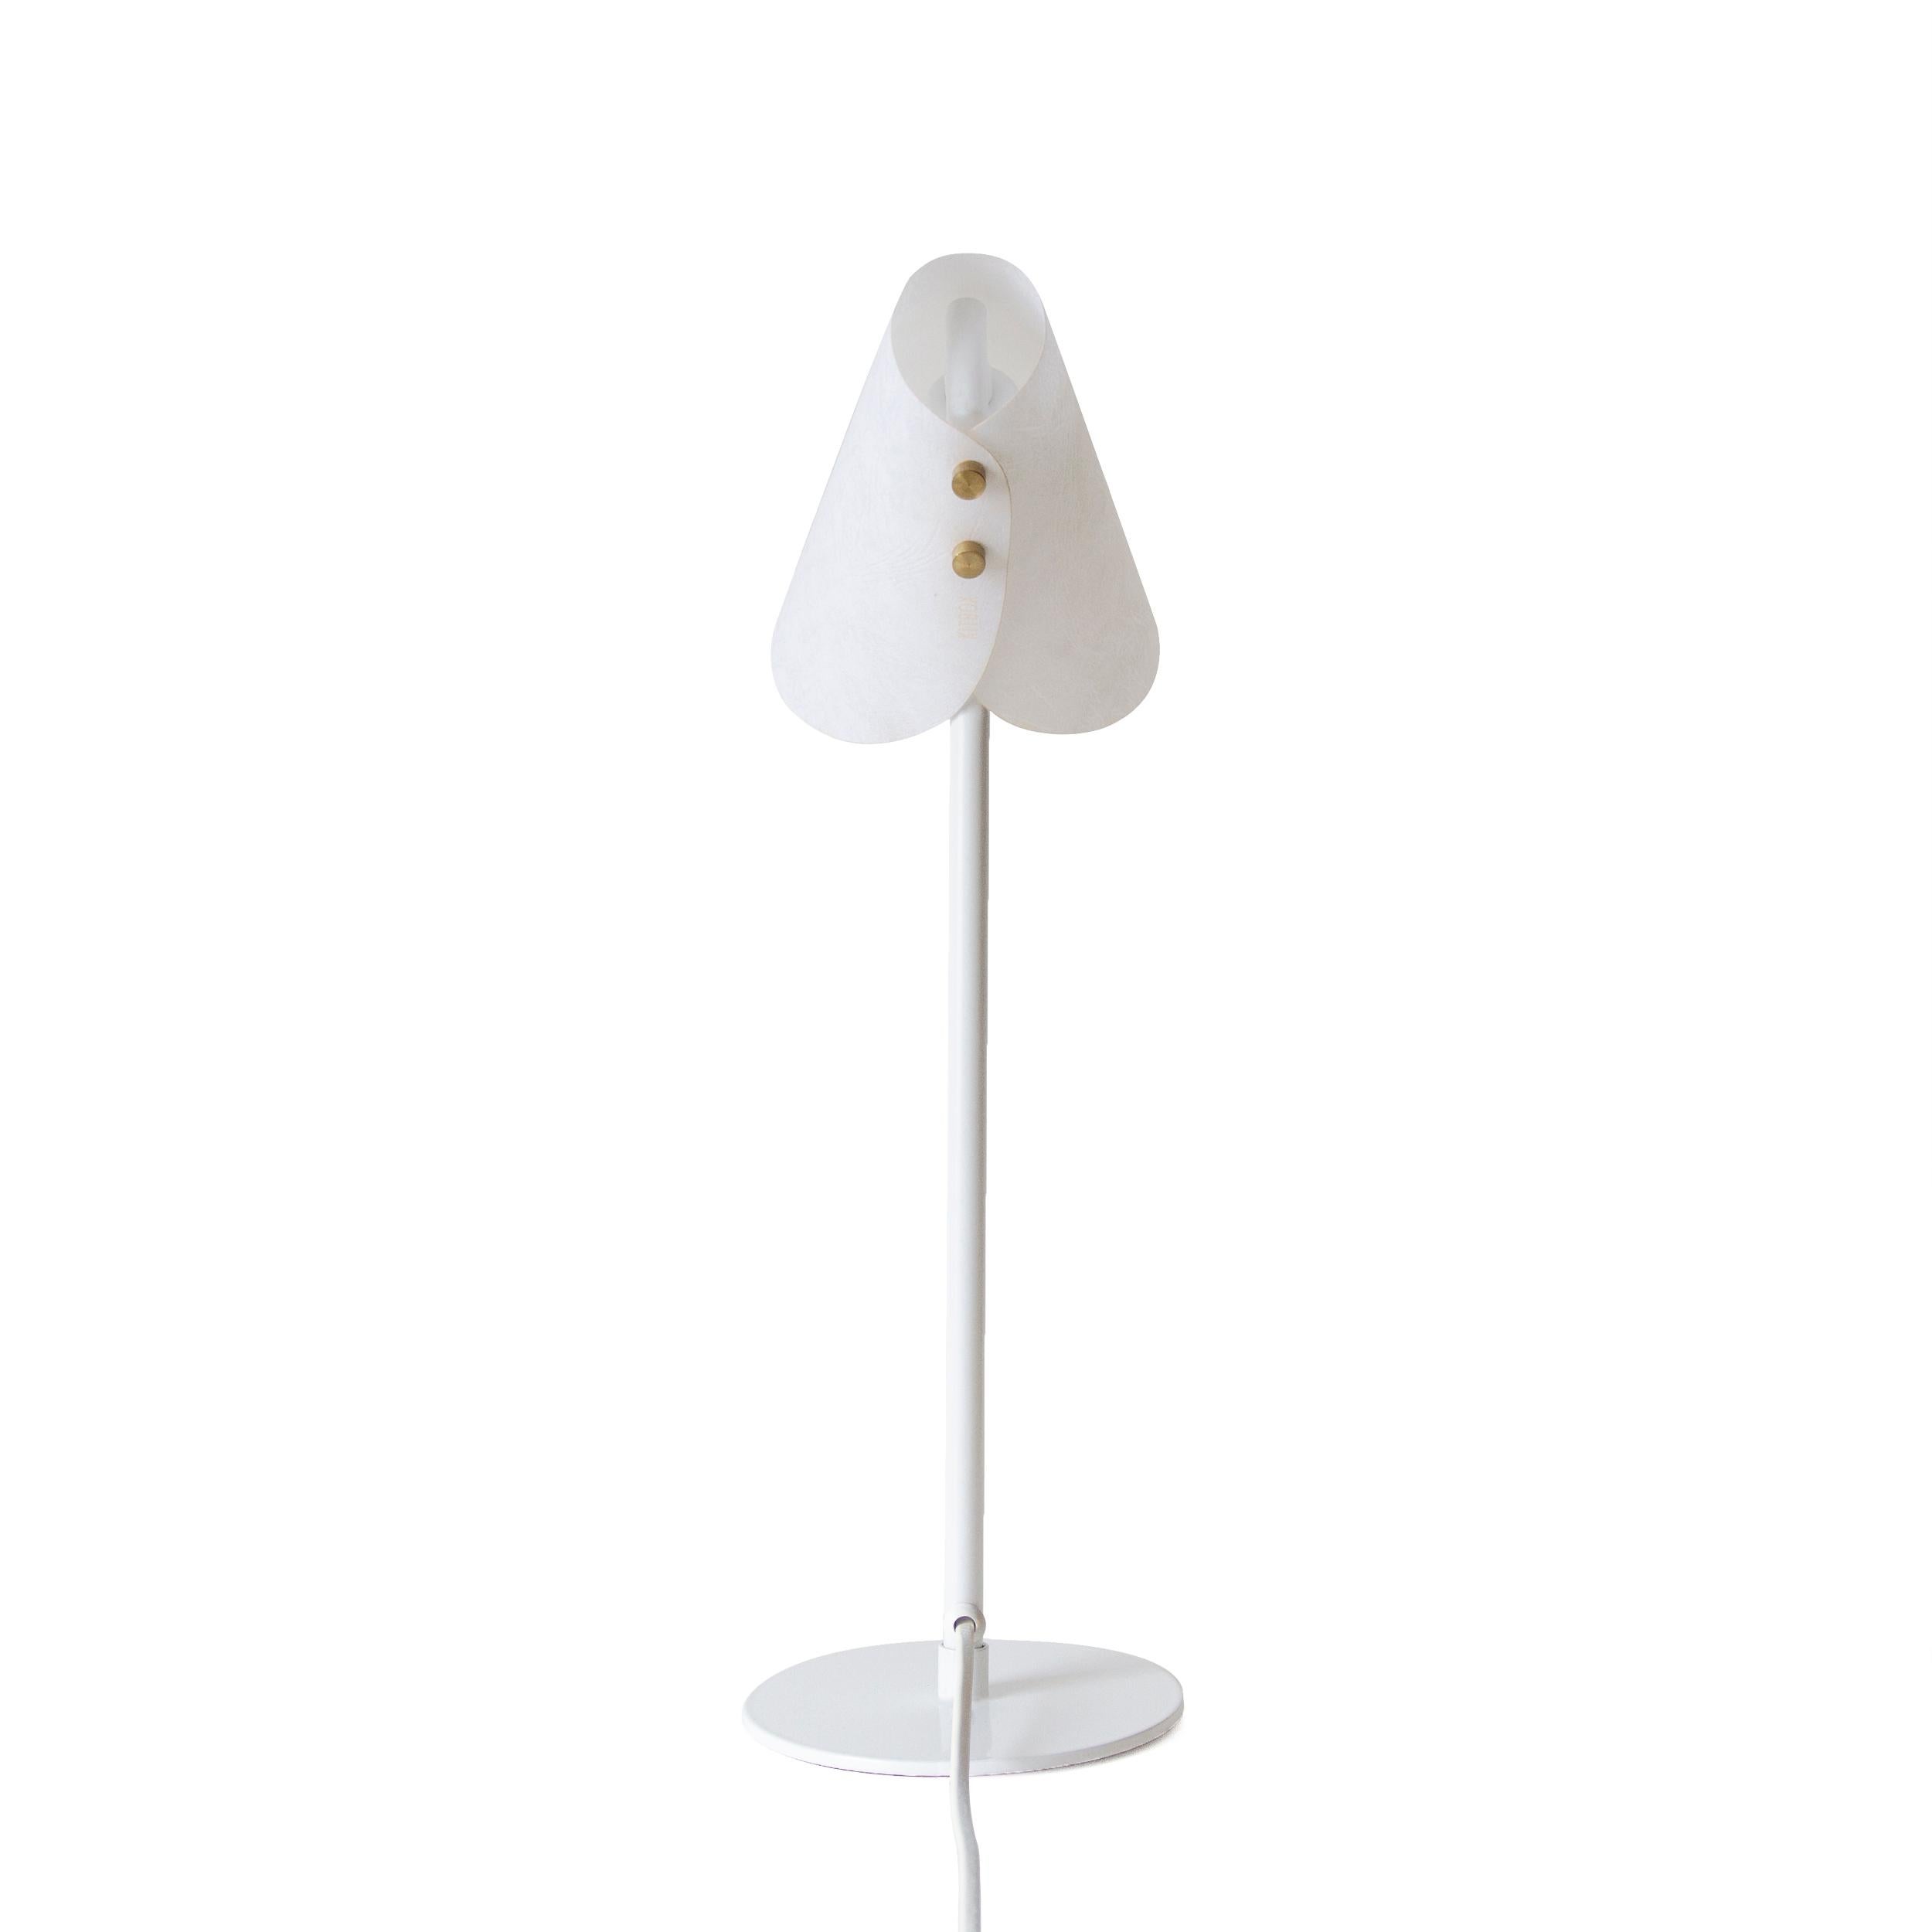 Turkish Metal & Parchment Desk Lamp, White, June, Inspired by Handmaid's Tale For Sale